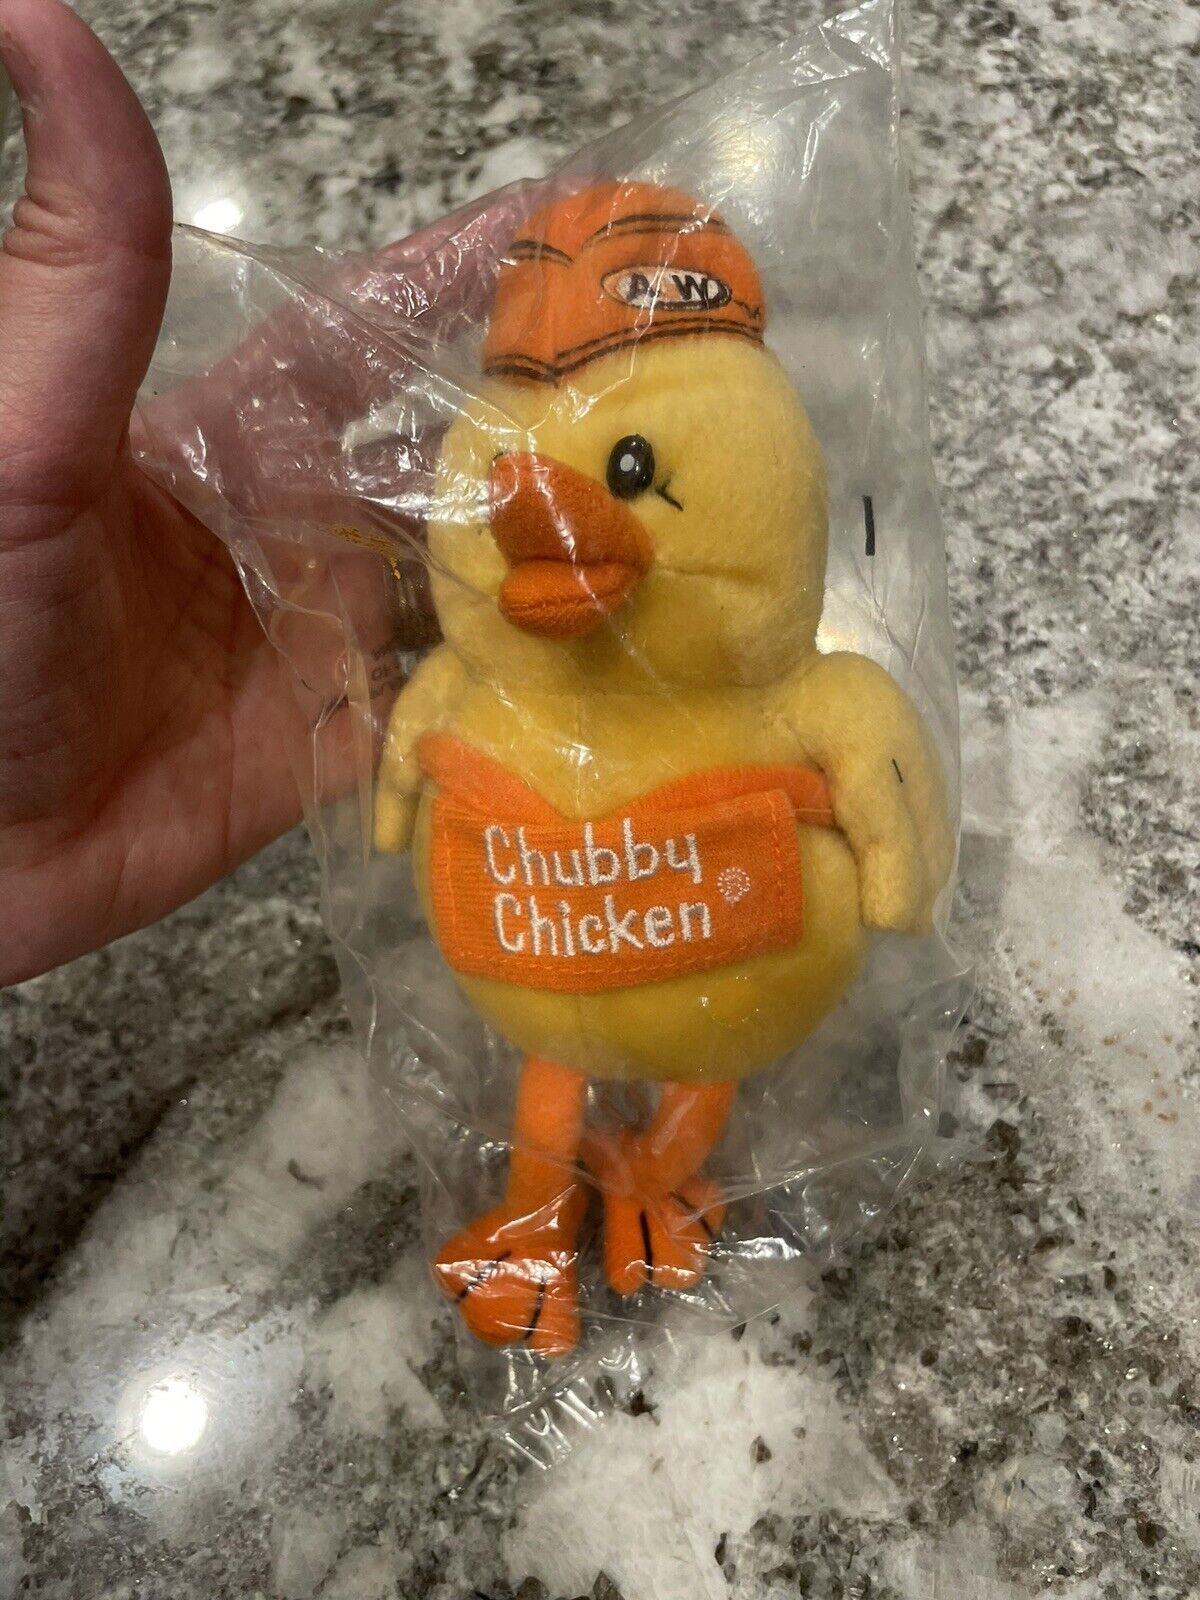 Vintage A&W Root Beer Chubby Chicken Plush